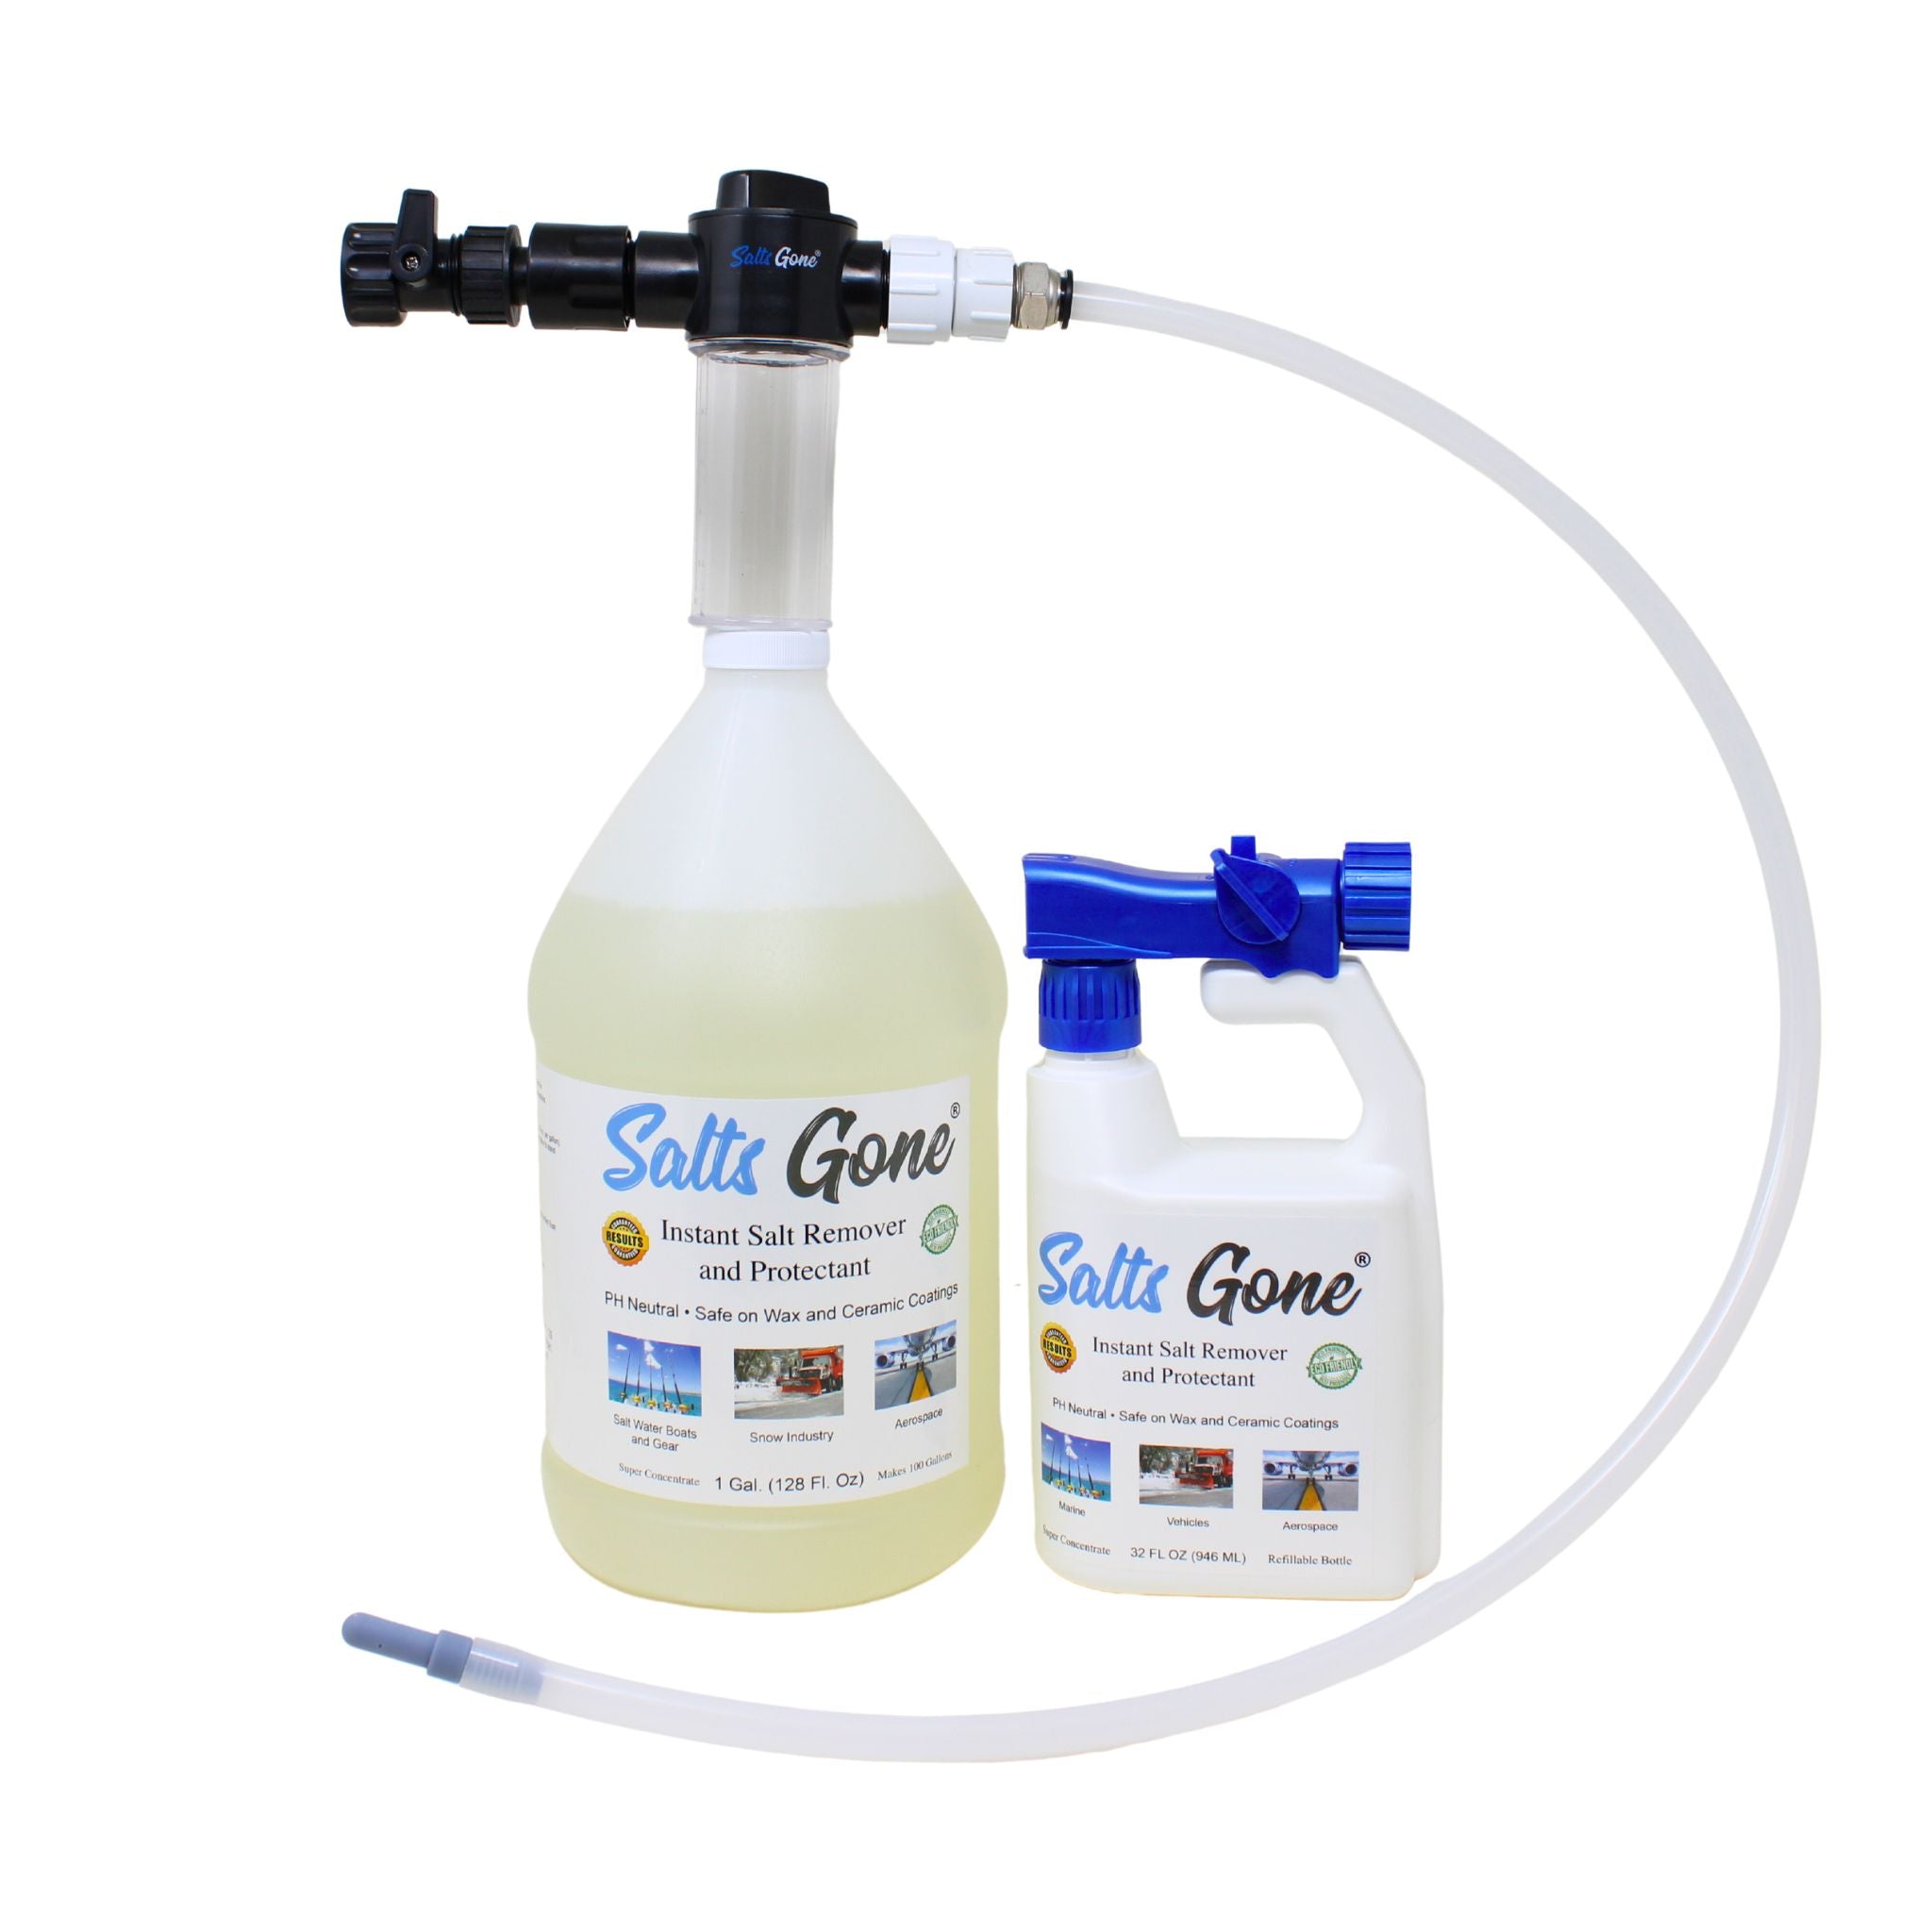 Combination Pack: Salts Gone™ Gallon, Hose End Sprayer, and Chassis Flush